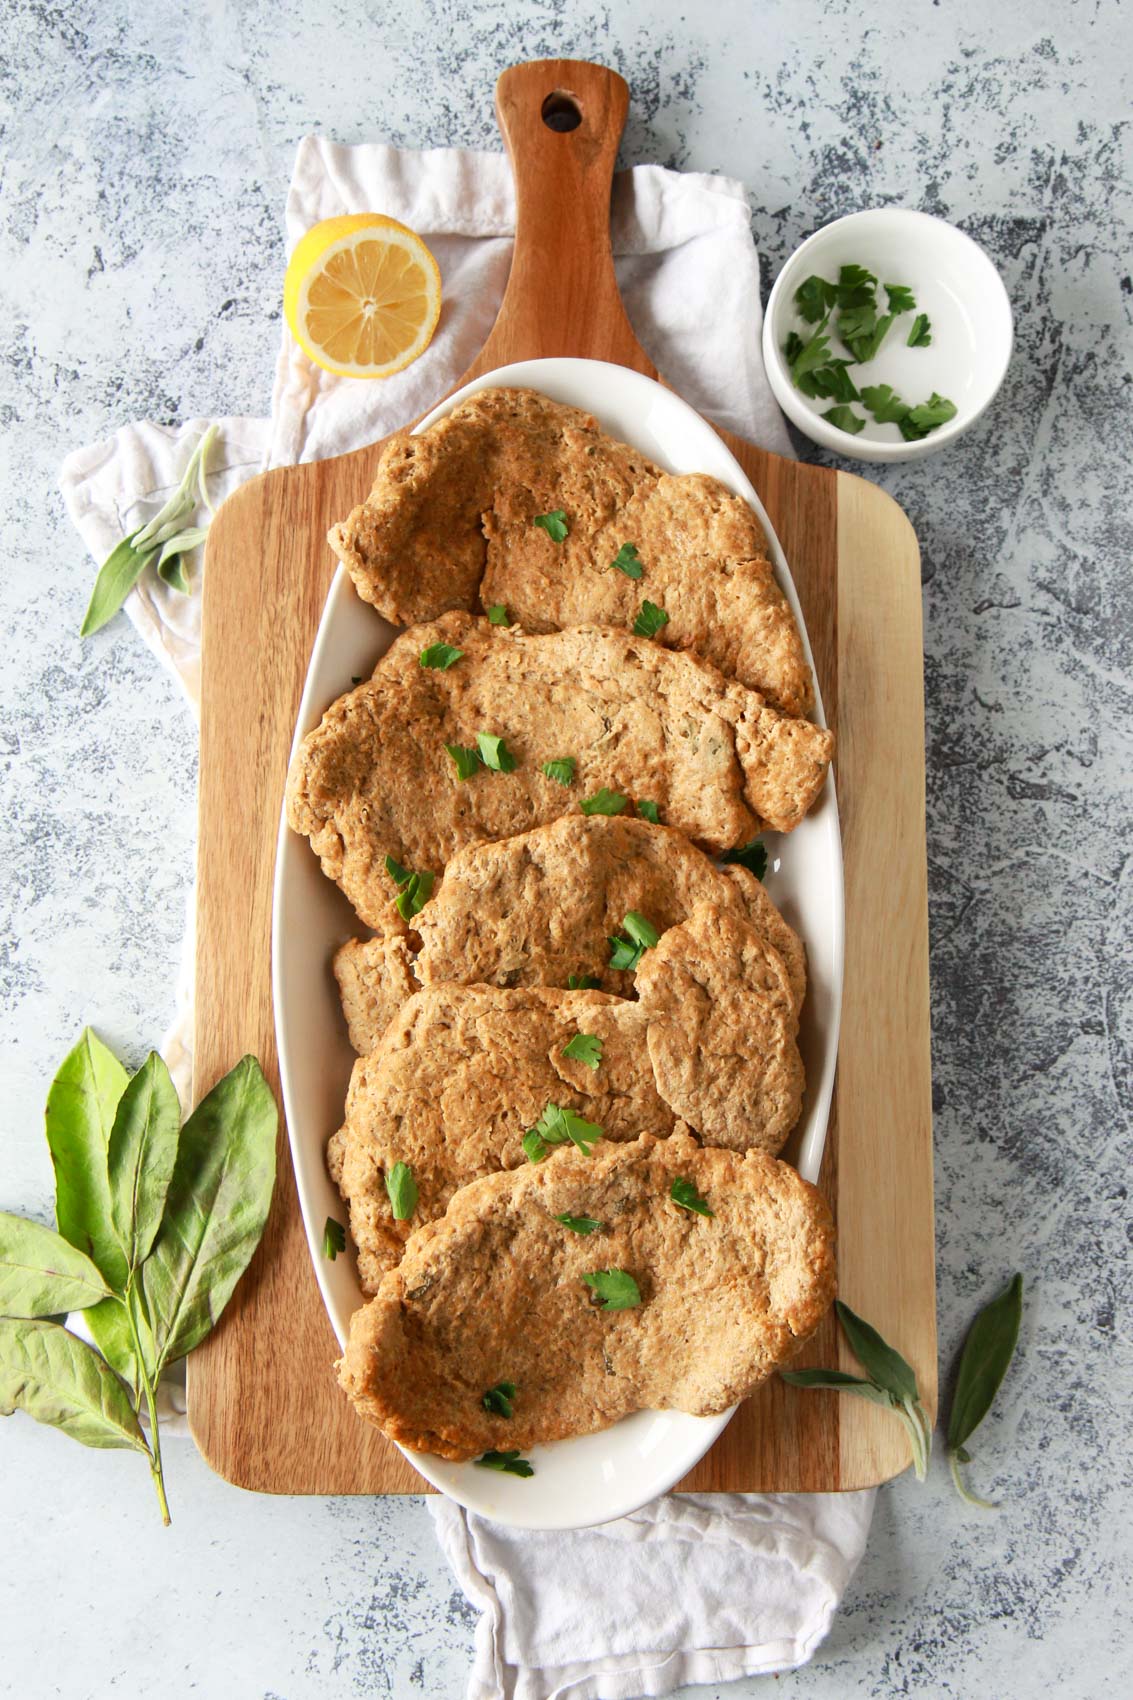 These seitan chicken cutlets are easy and versatile. A vegan meat replacement, these seitan chicken breasts are simmered and done in under an hour. This plant based chicken alternative recipe is made from vital wheat gluten, packed with protein, and flavored with savory herbs.